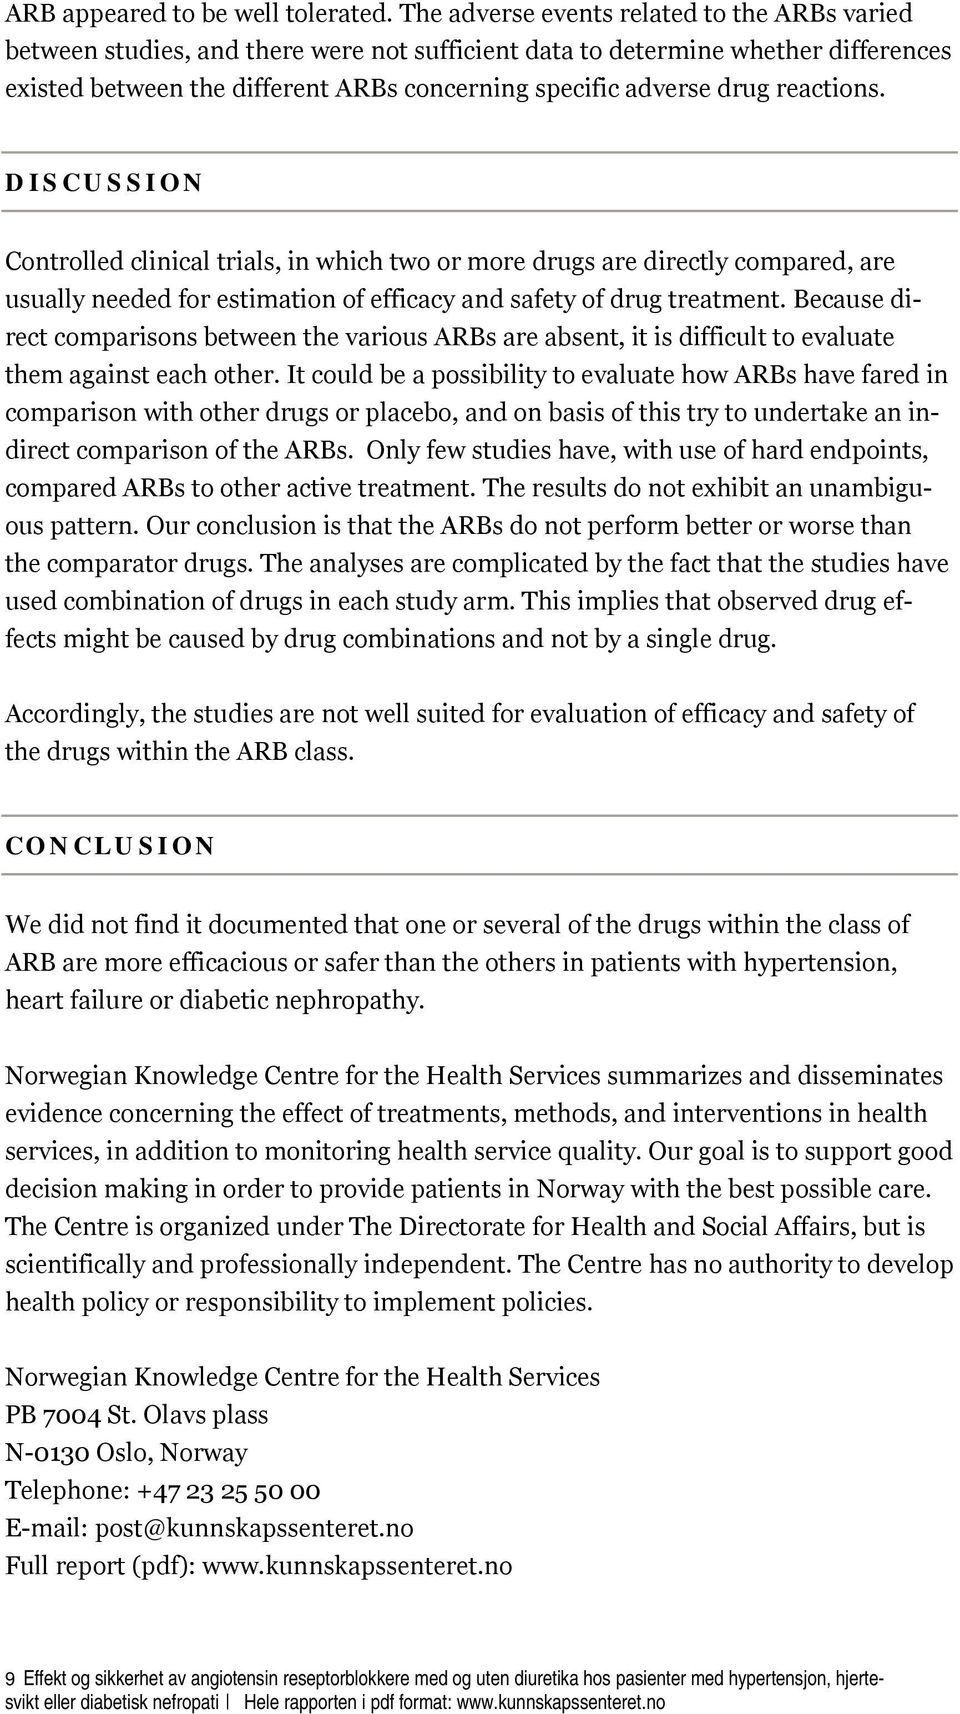 reactions. DISCUSSION Controlled clinical trials, in which two or more drugs are directly compared, are usually needed for estimation of efficacy and safety of drug treatment.